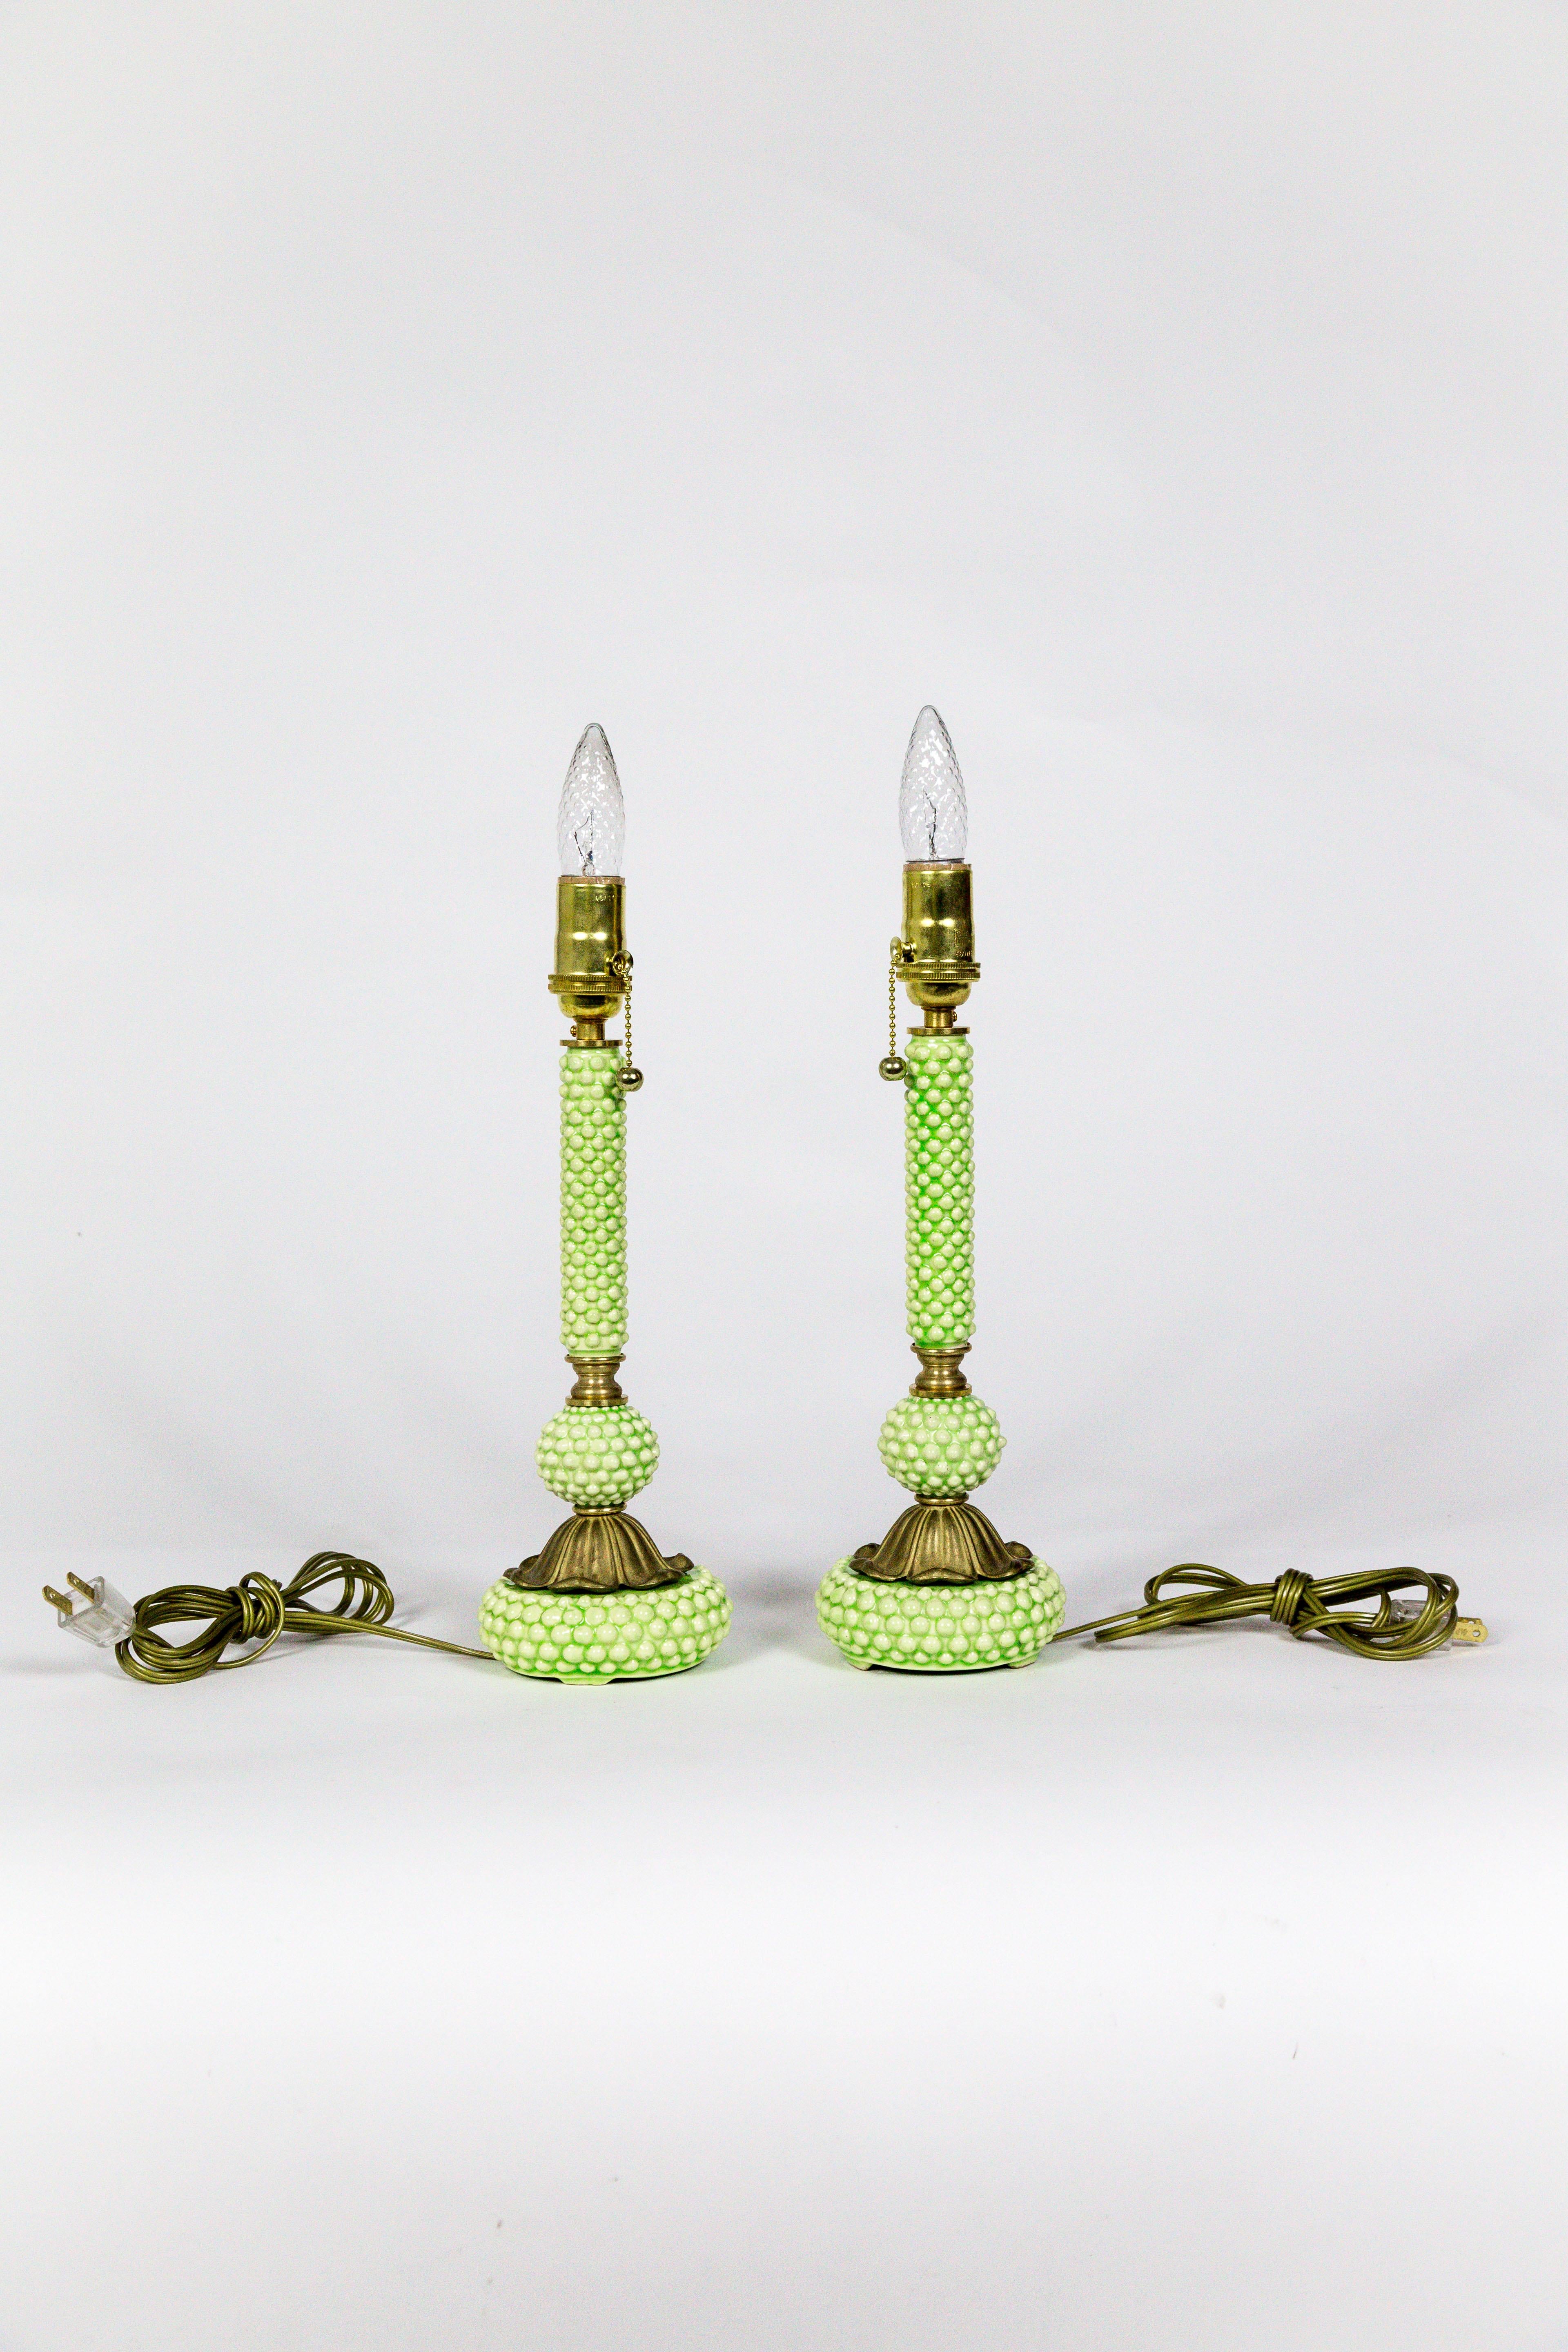 Molded Midcentury Green Hobnail Ceramic and Brass Lamps 'Pair'